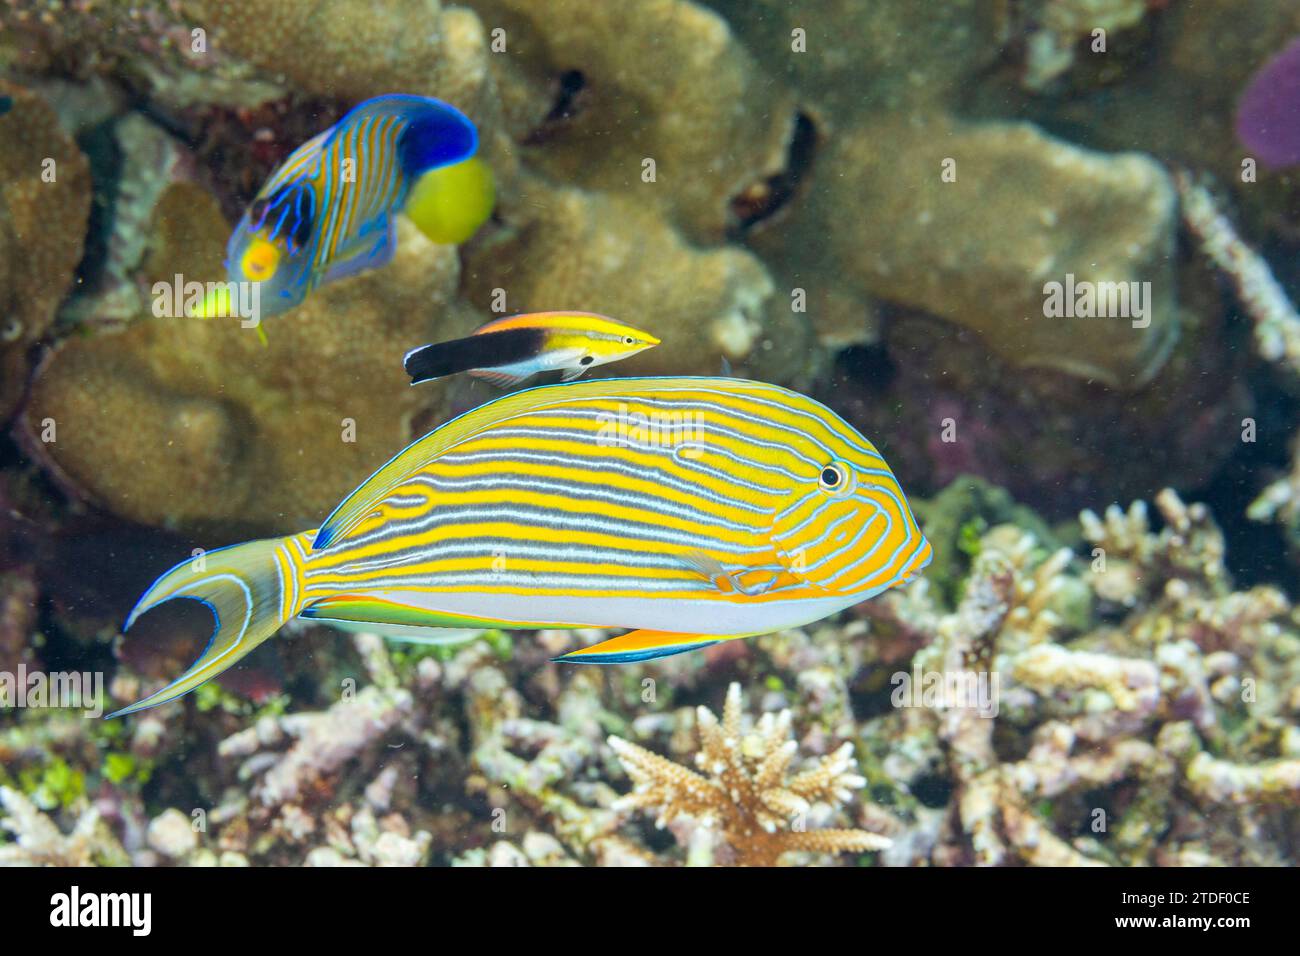 An adult bluestreak cleaner wrasse (Labroides dimidiatus) at a cleaning station on the reef off Kri Island, Raja Ampat, Indonesia, Southeast Asia Stock Photo